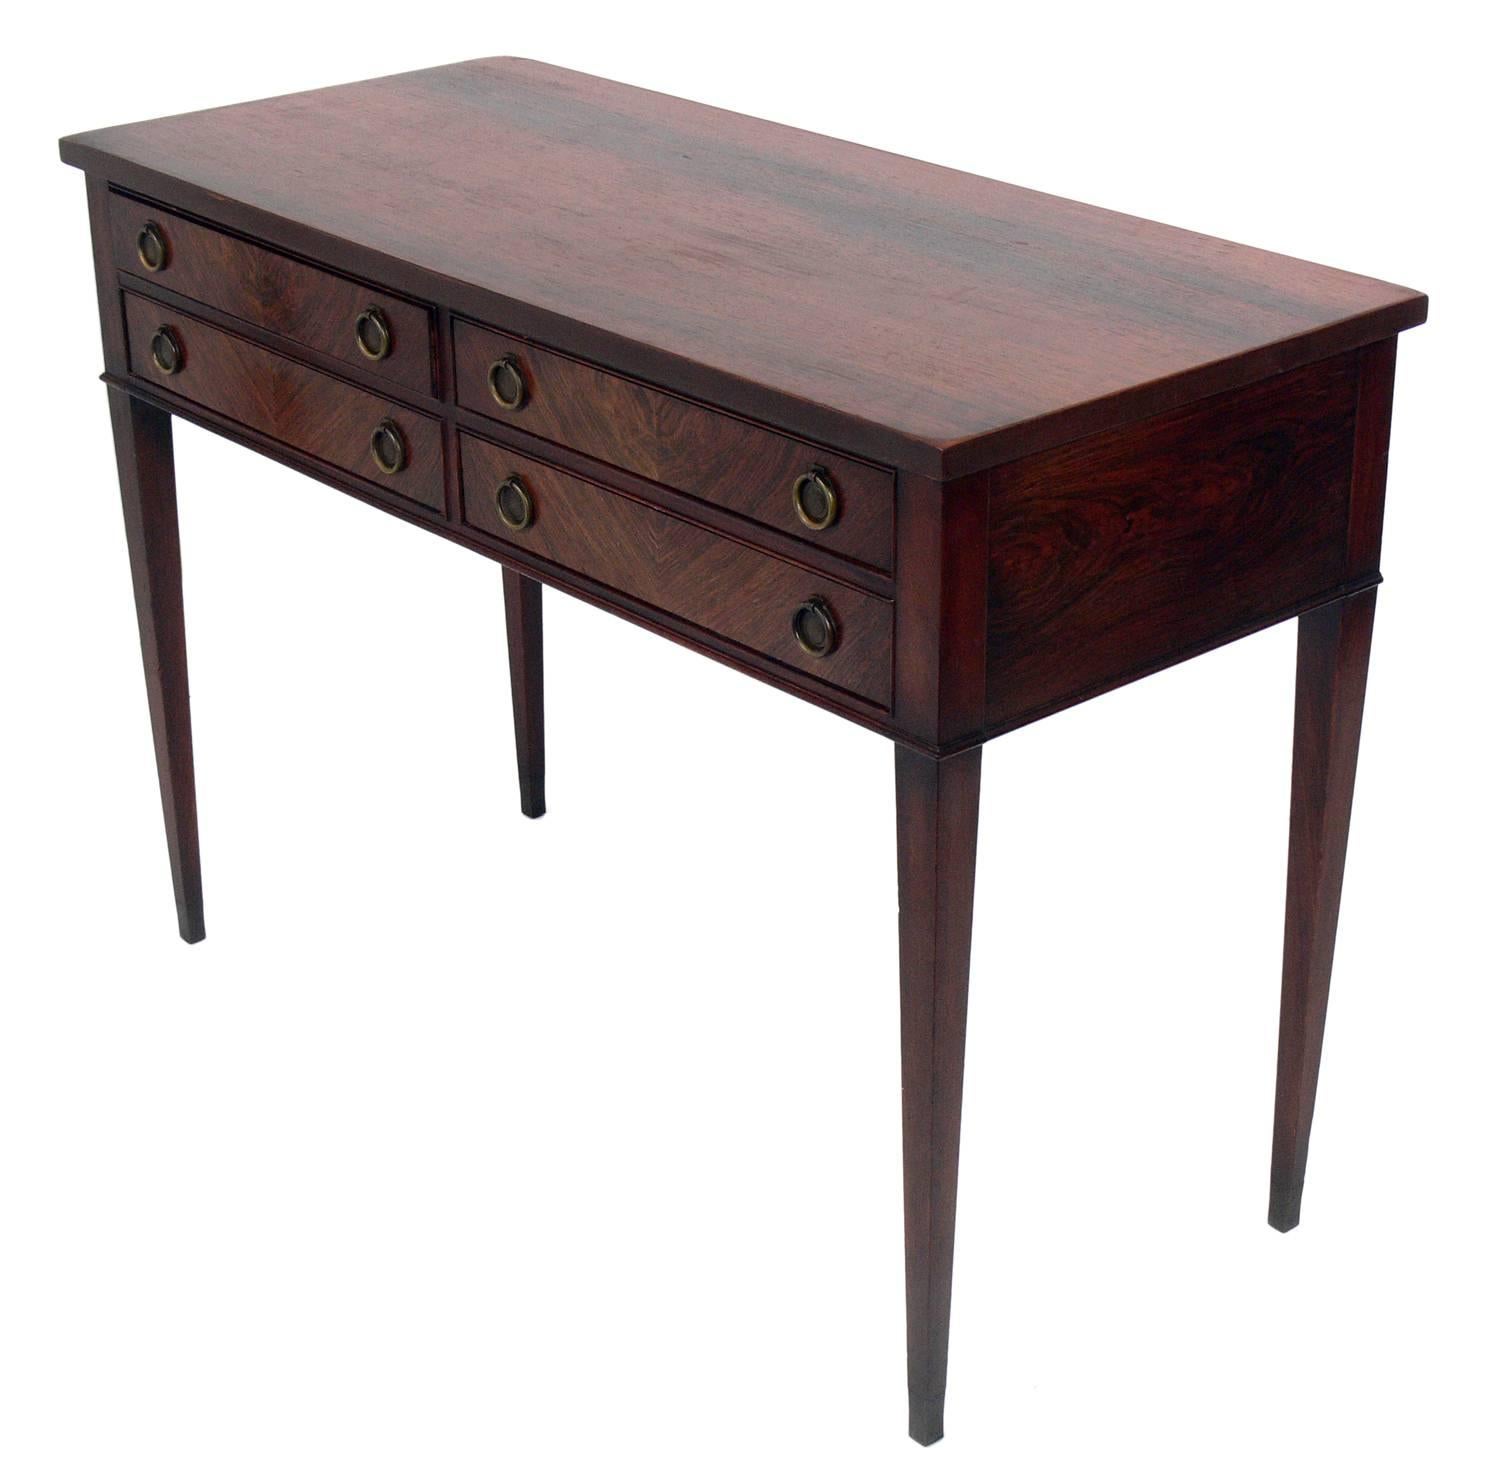 Clean lined Danish modern rosewood console, Denmark, circa 1940s-1950s. This piece is constructed of rosewood and possibly teak and retains it's original patinated brass hardware. It is a versatile size and would work well as a console table, desk,